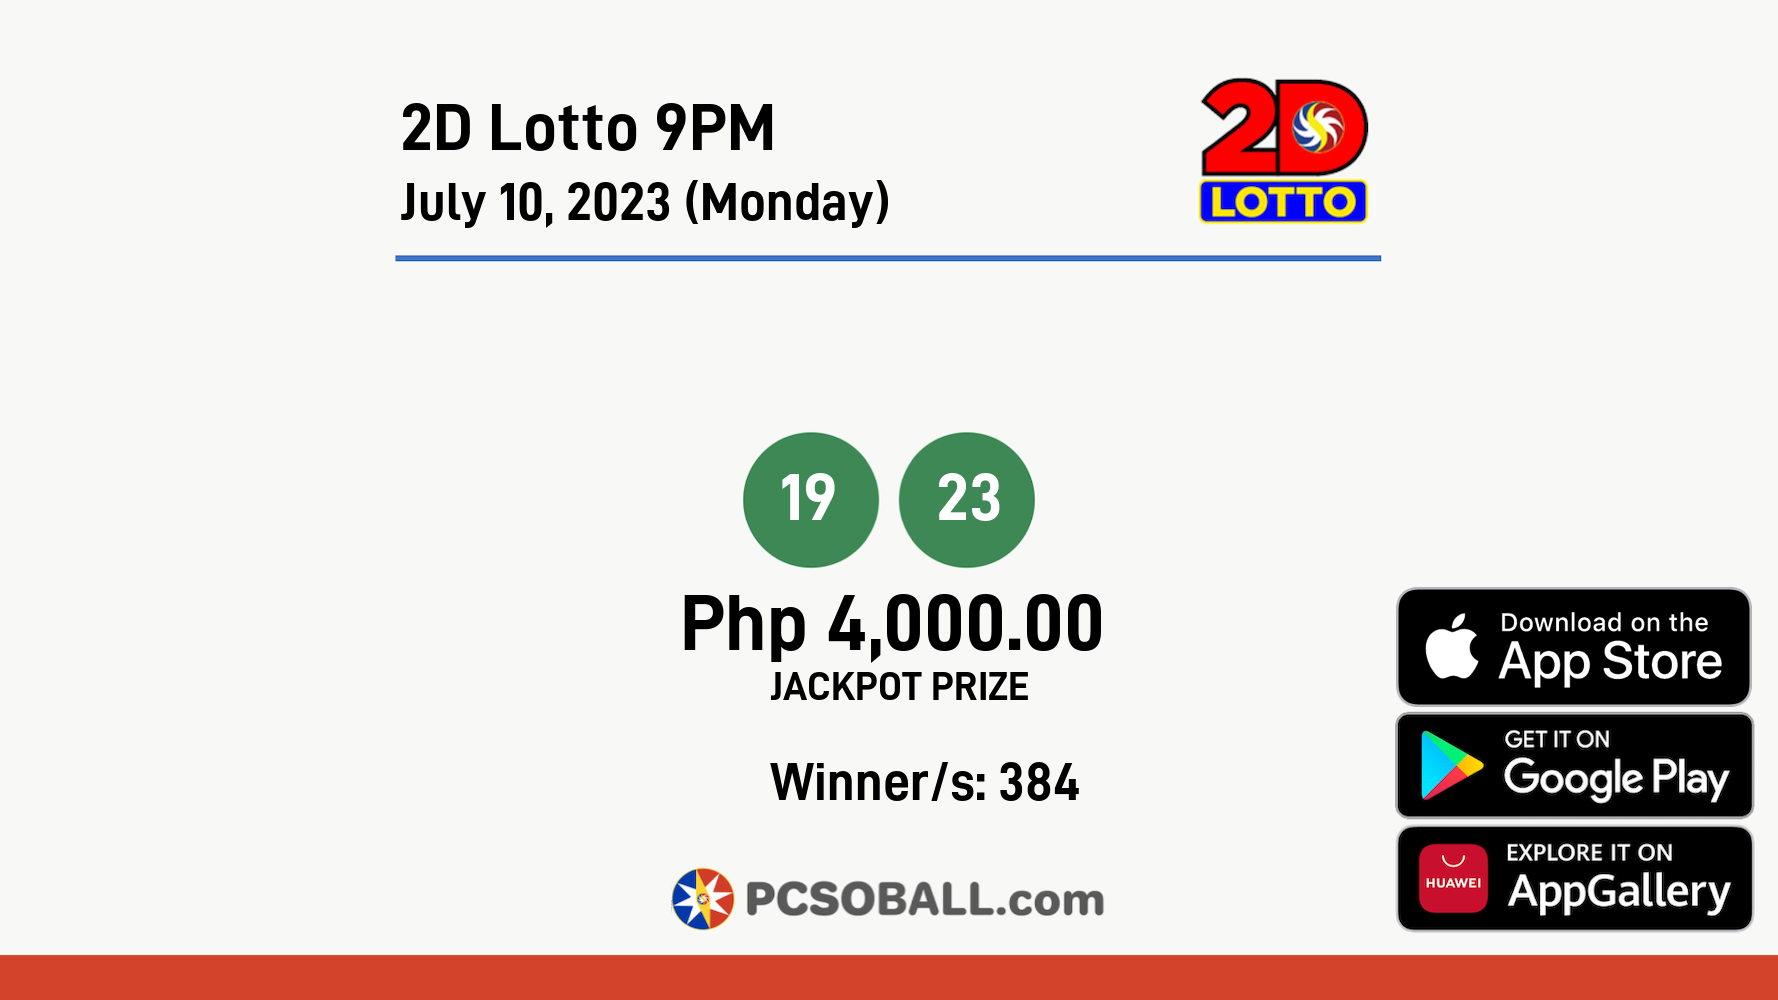 2D Lotto 9PM July 10, 2023 (Monday) Result